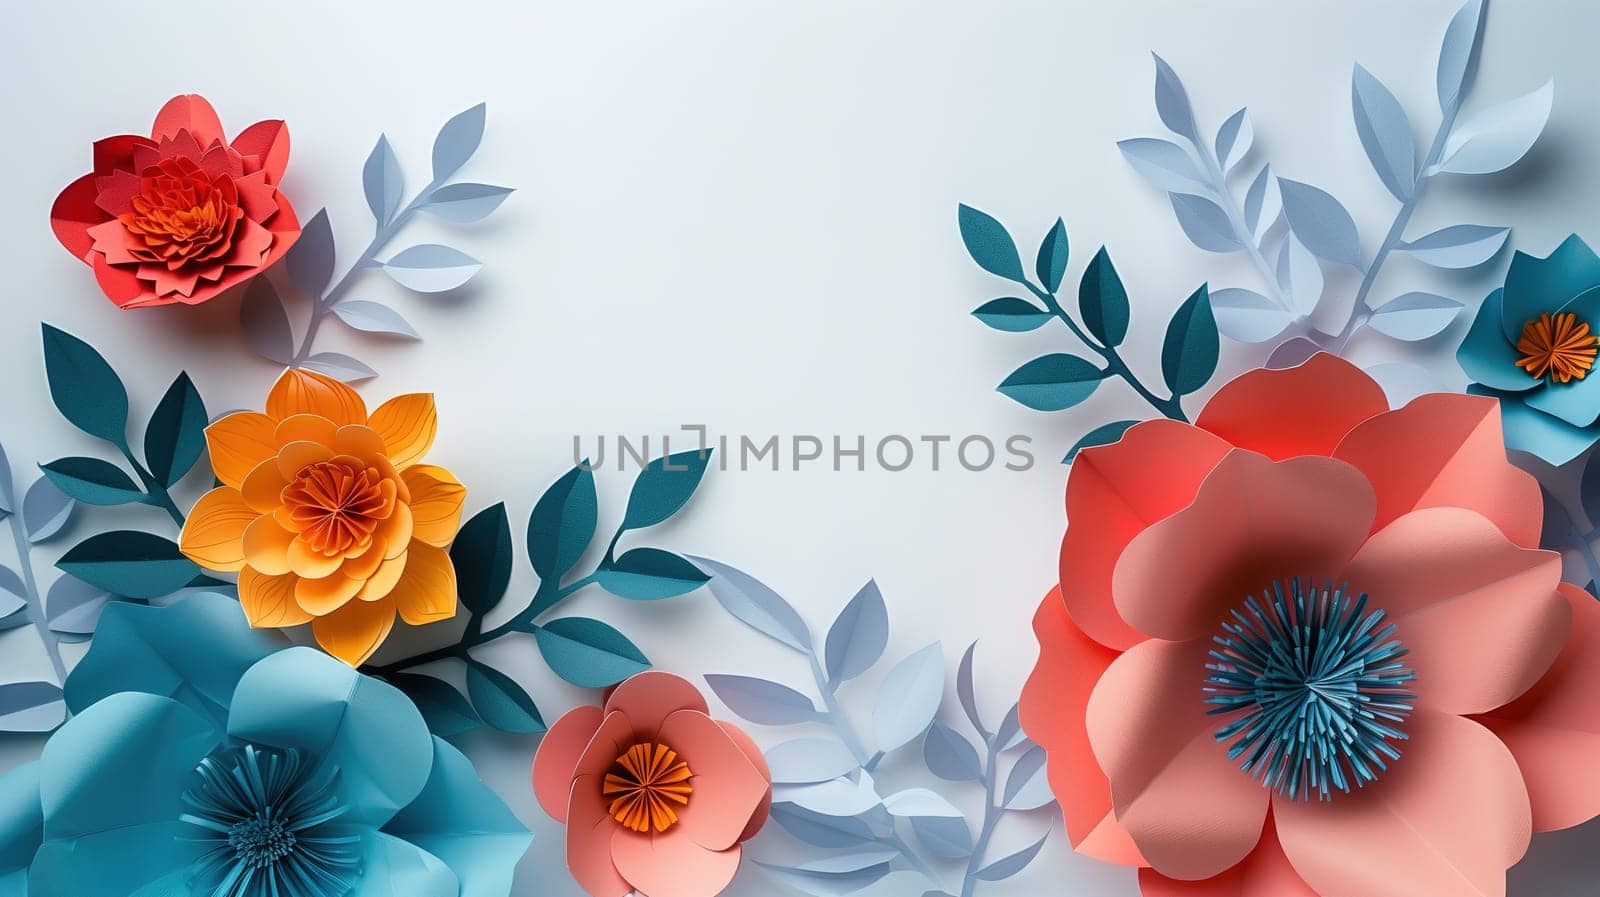 A collection of paper flowers in various colors, sizes, and shapes are arranged on a white background with interspersed green leaves. The delicate petals and intricate designs of the paper flowers contrast beautifully with the simplicity of the white backdrop.